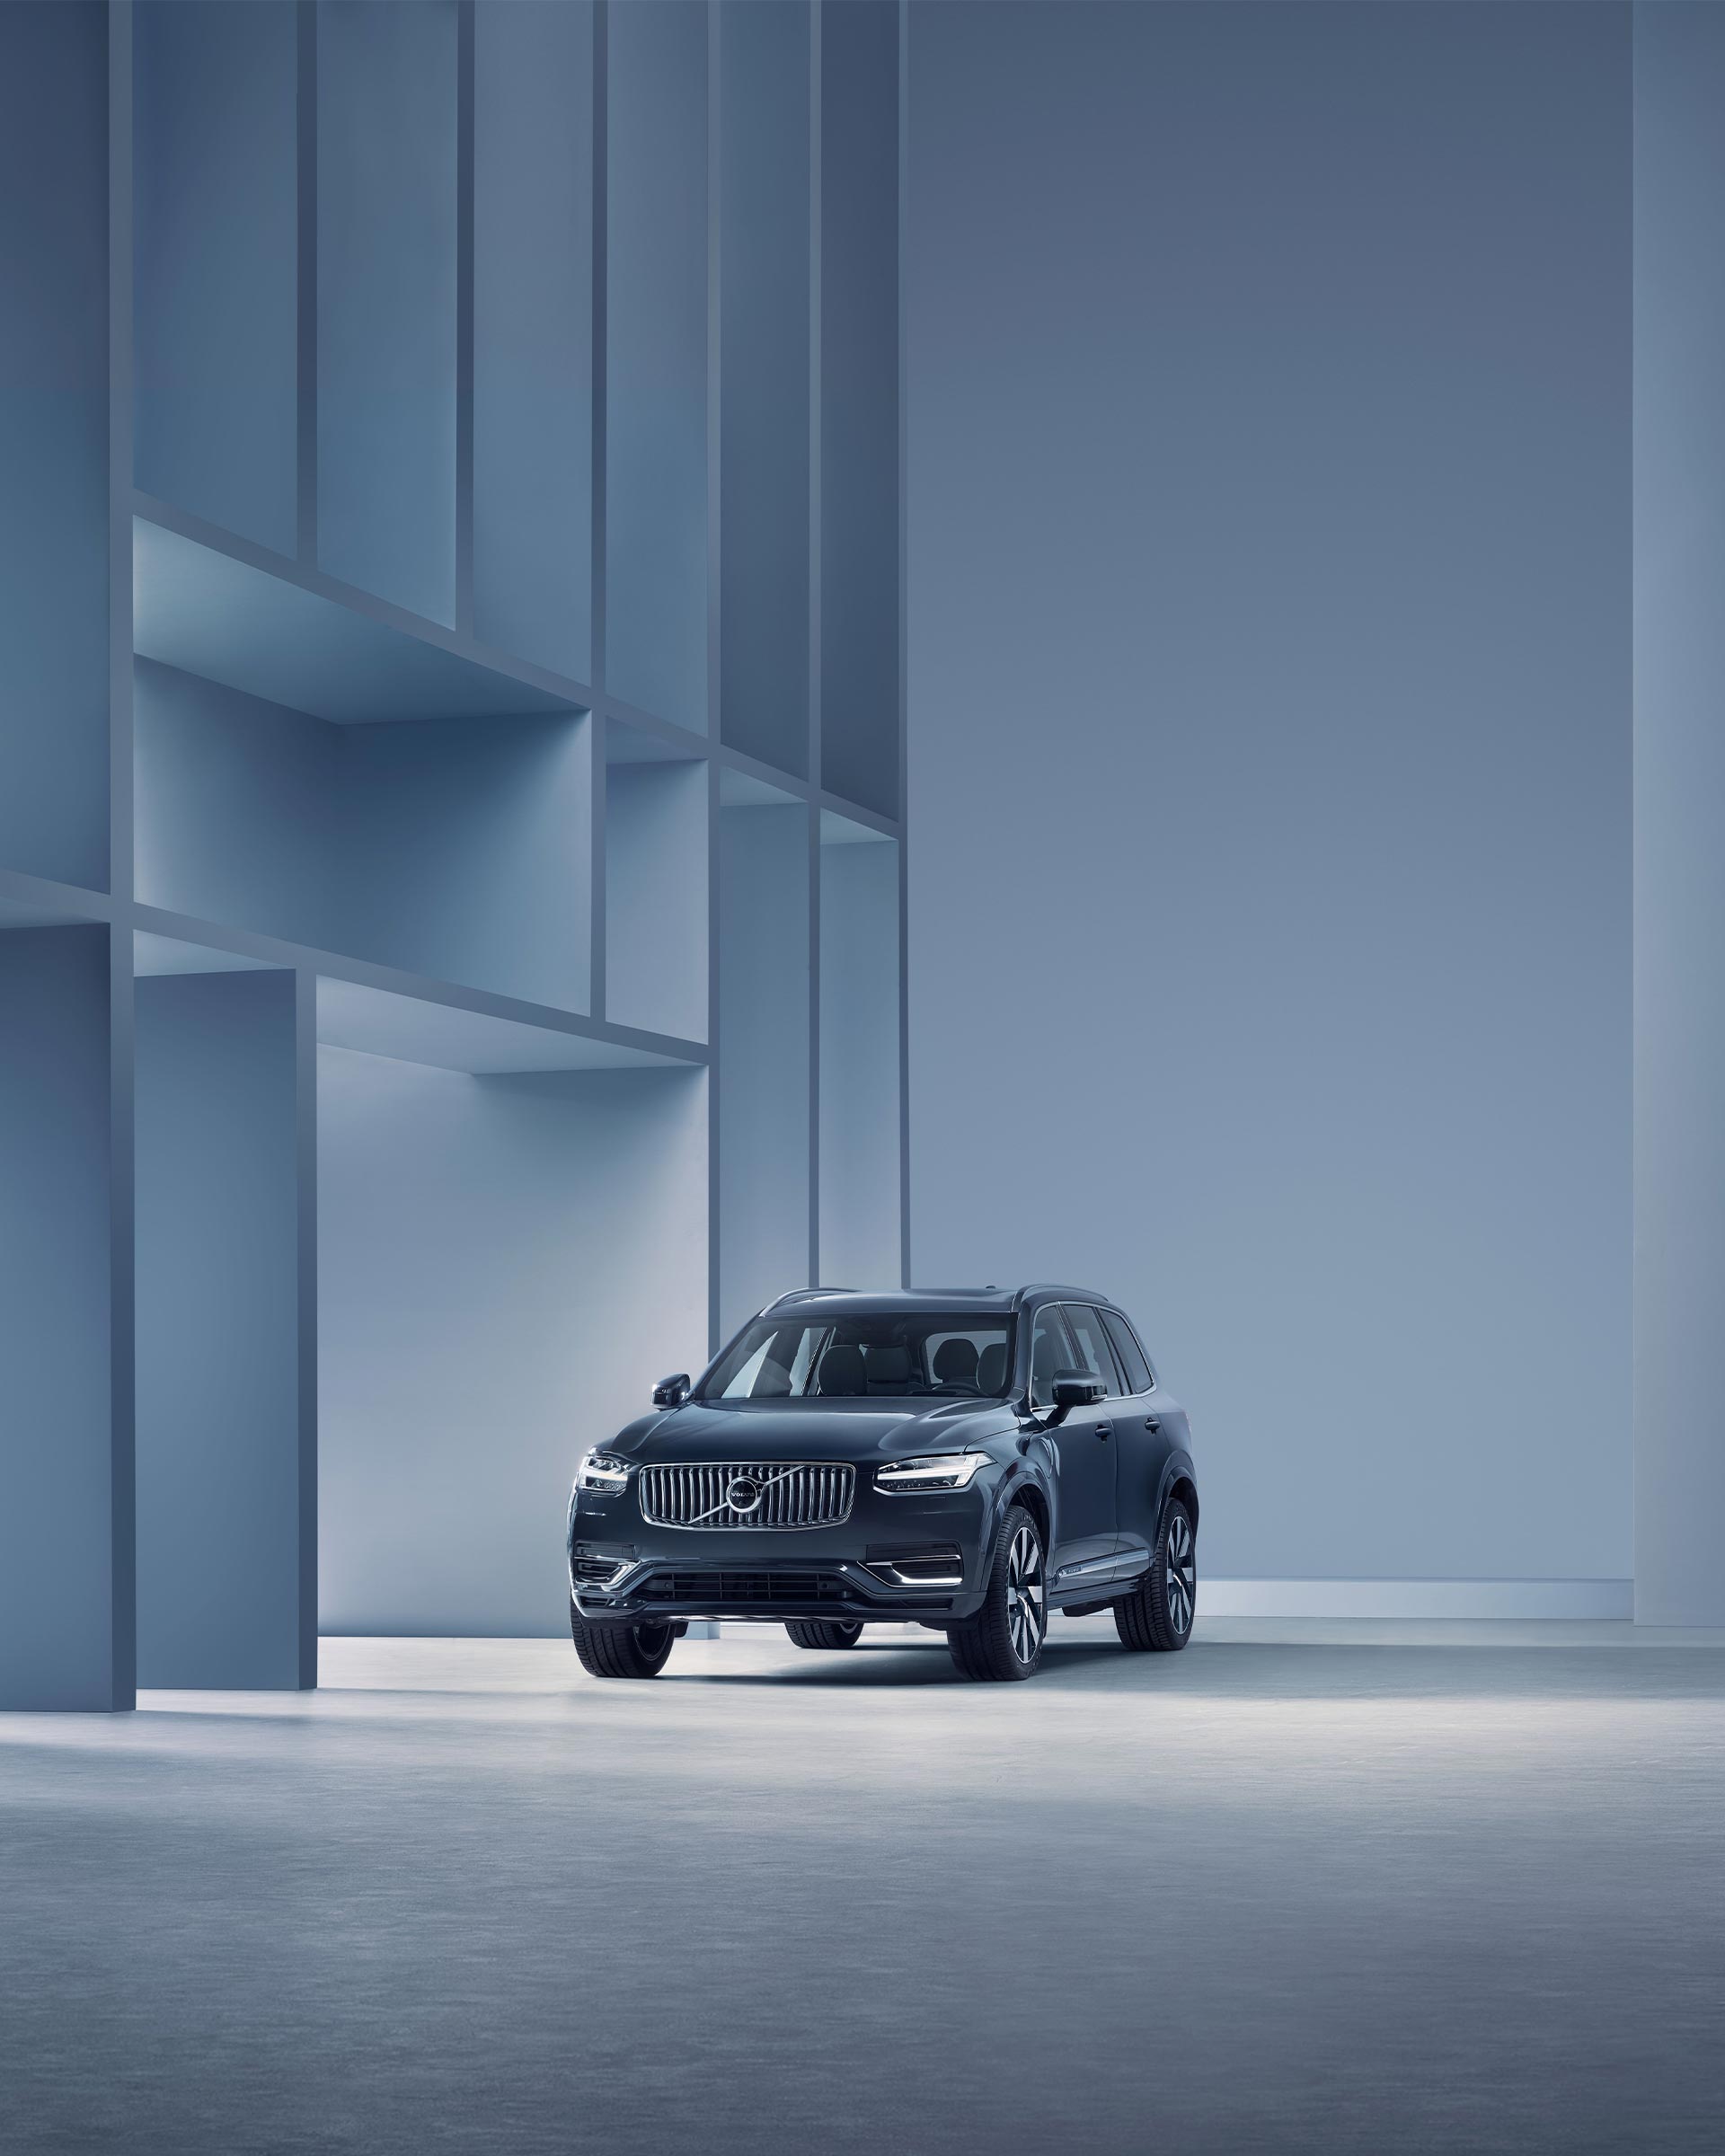 Exterior view of the Volvo XC90 Recharge plug-in hybrid’s contemporary design.